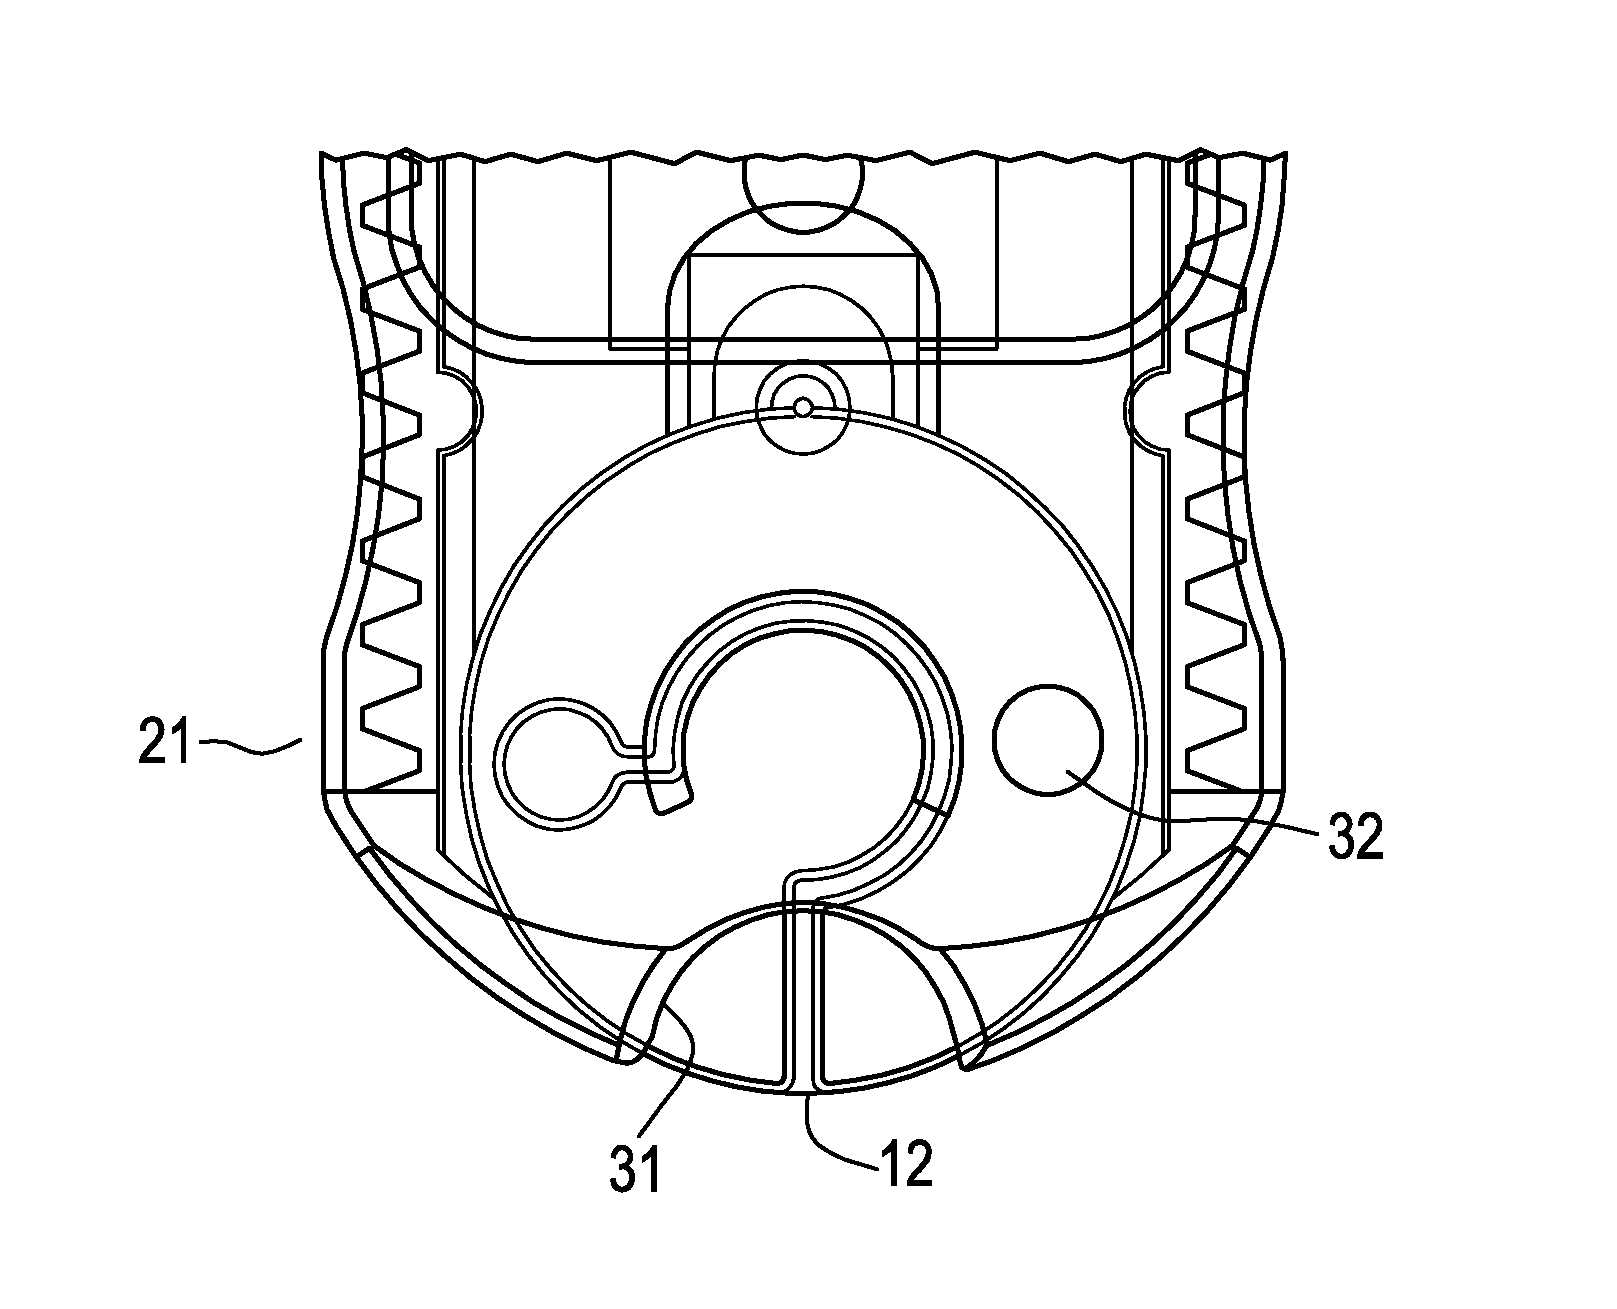 Rotatable disk-shaped fluid sample collection device